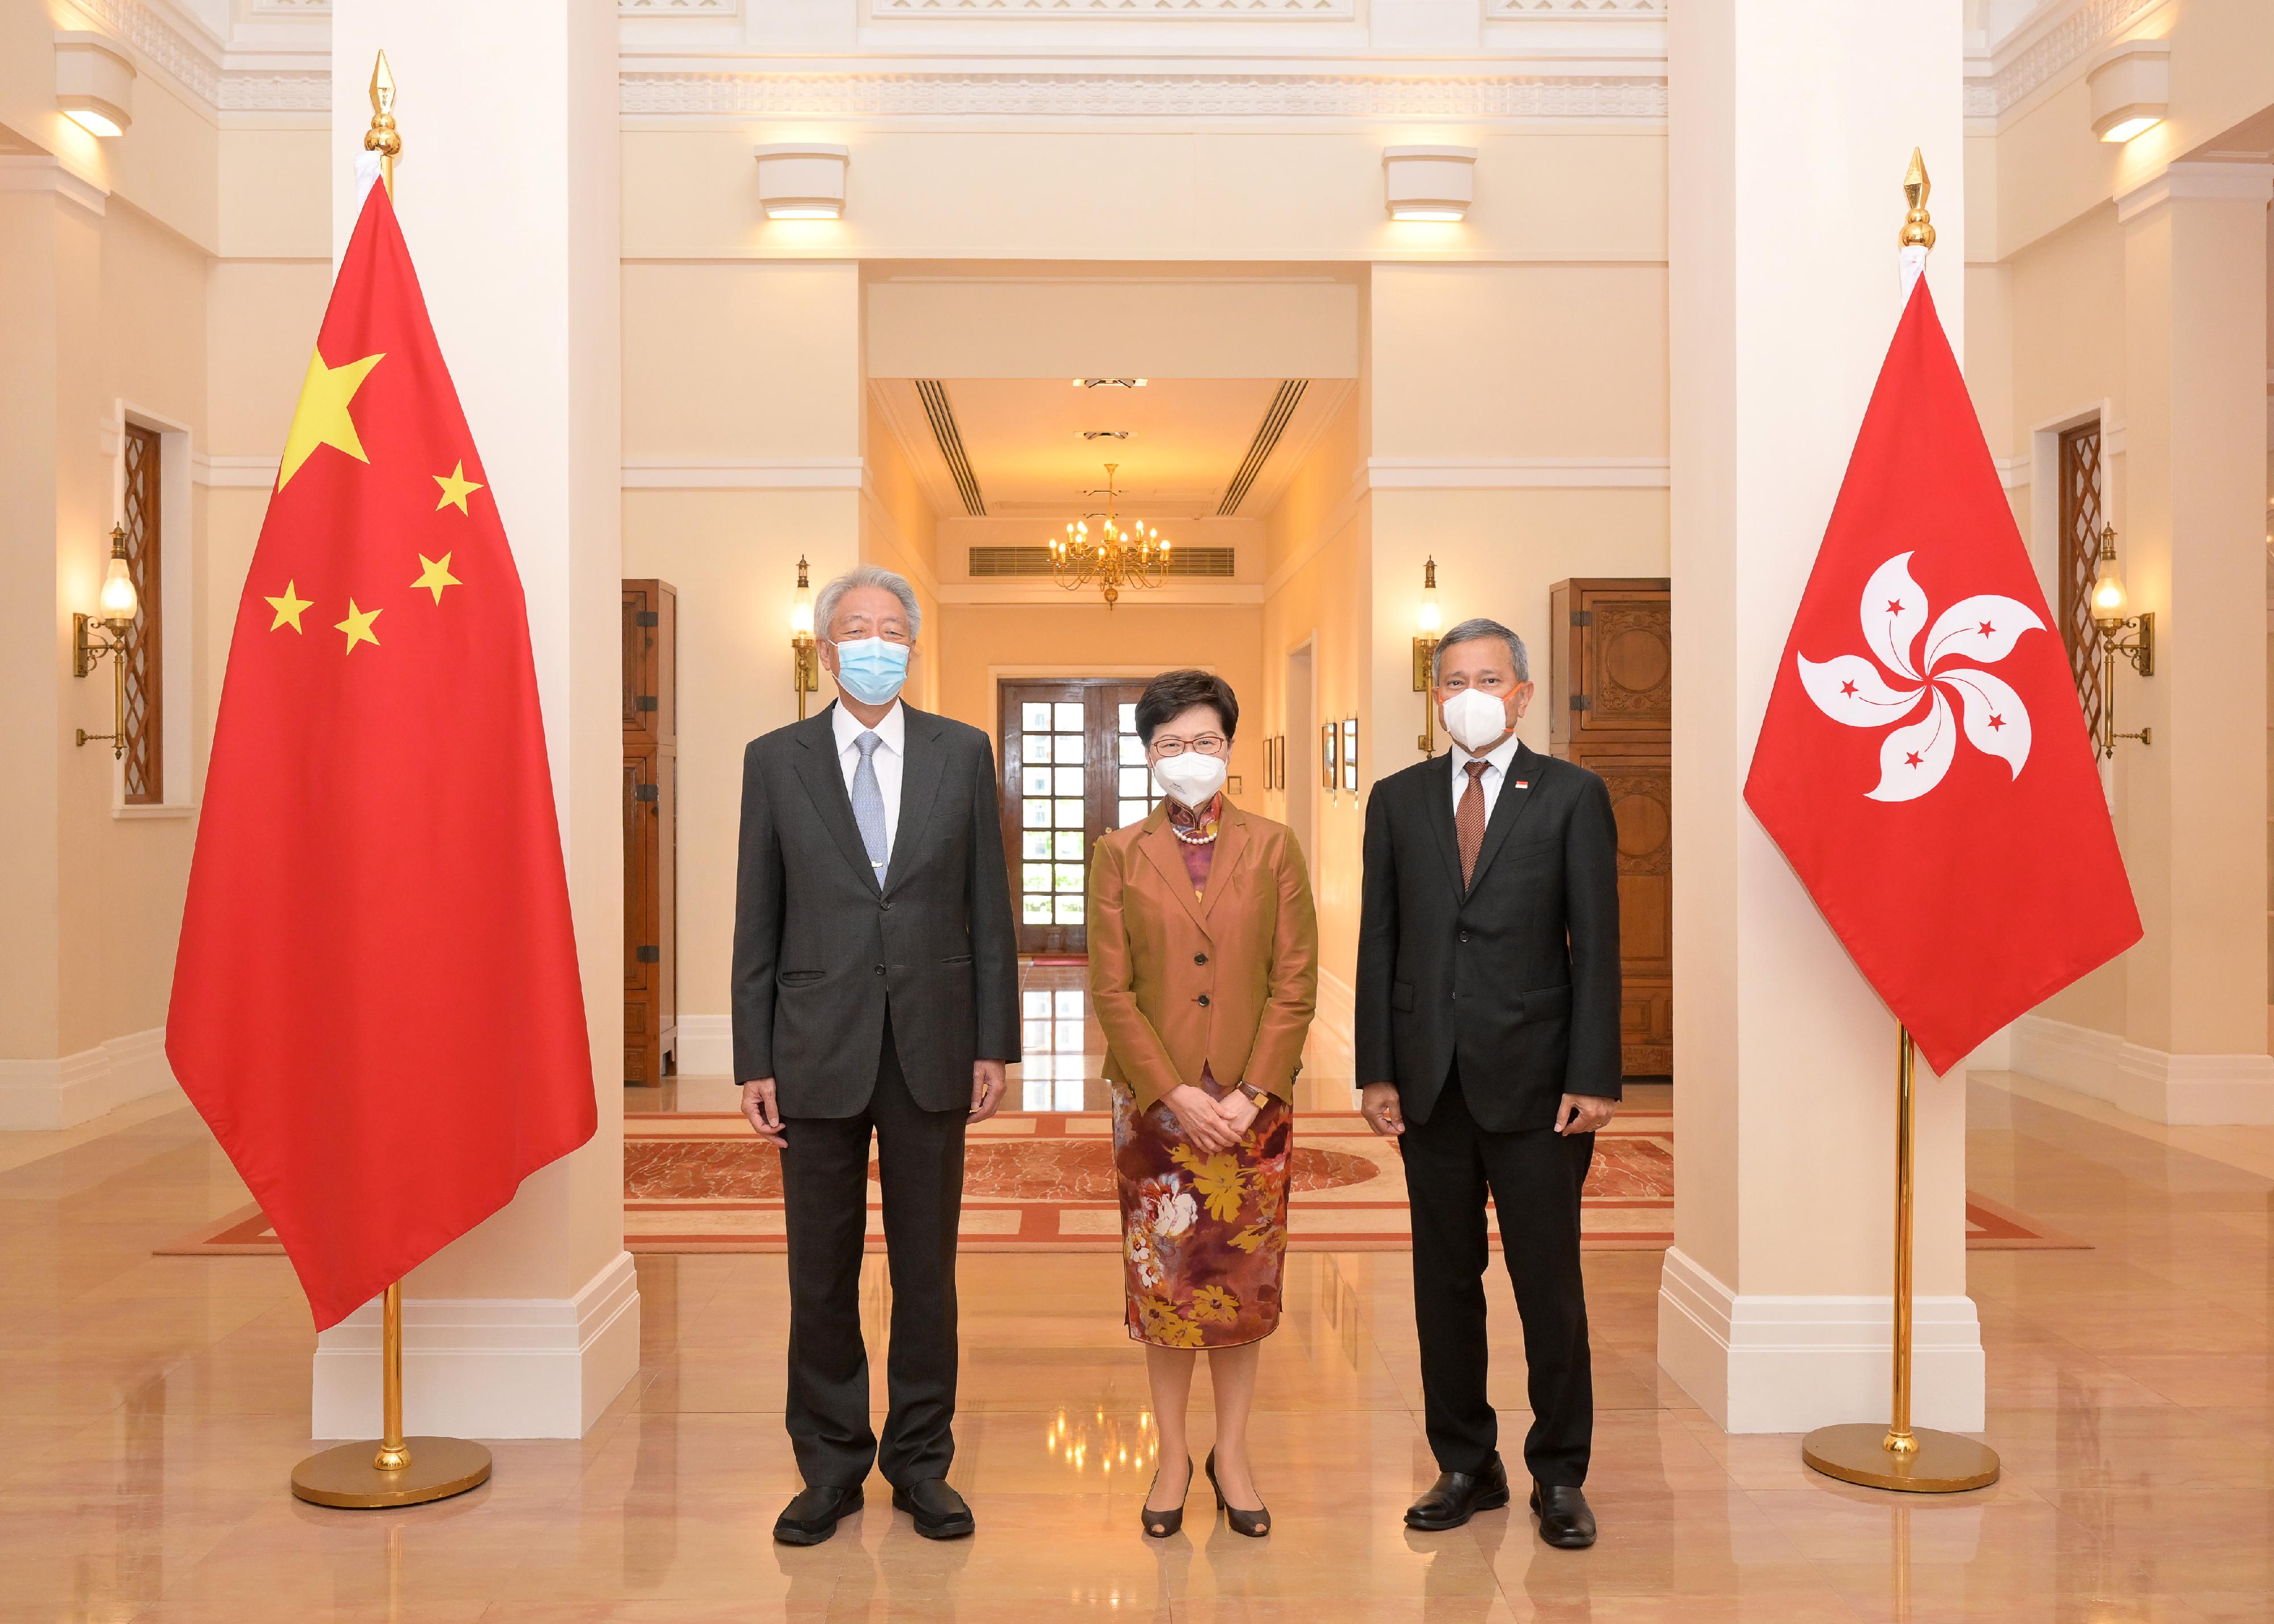 The Chief Executive, Mrs Carrie Lam (centre), met with the Senior Minister and Coordinating Minister for National Security of Singapore, Mr Teo Chee Hean (left), and the Minister for Foreign Affairs of Singapore, Dr Vivian Balakrishnan (right), at Government House today (May 30).